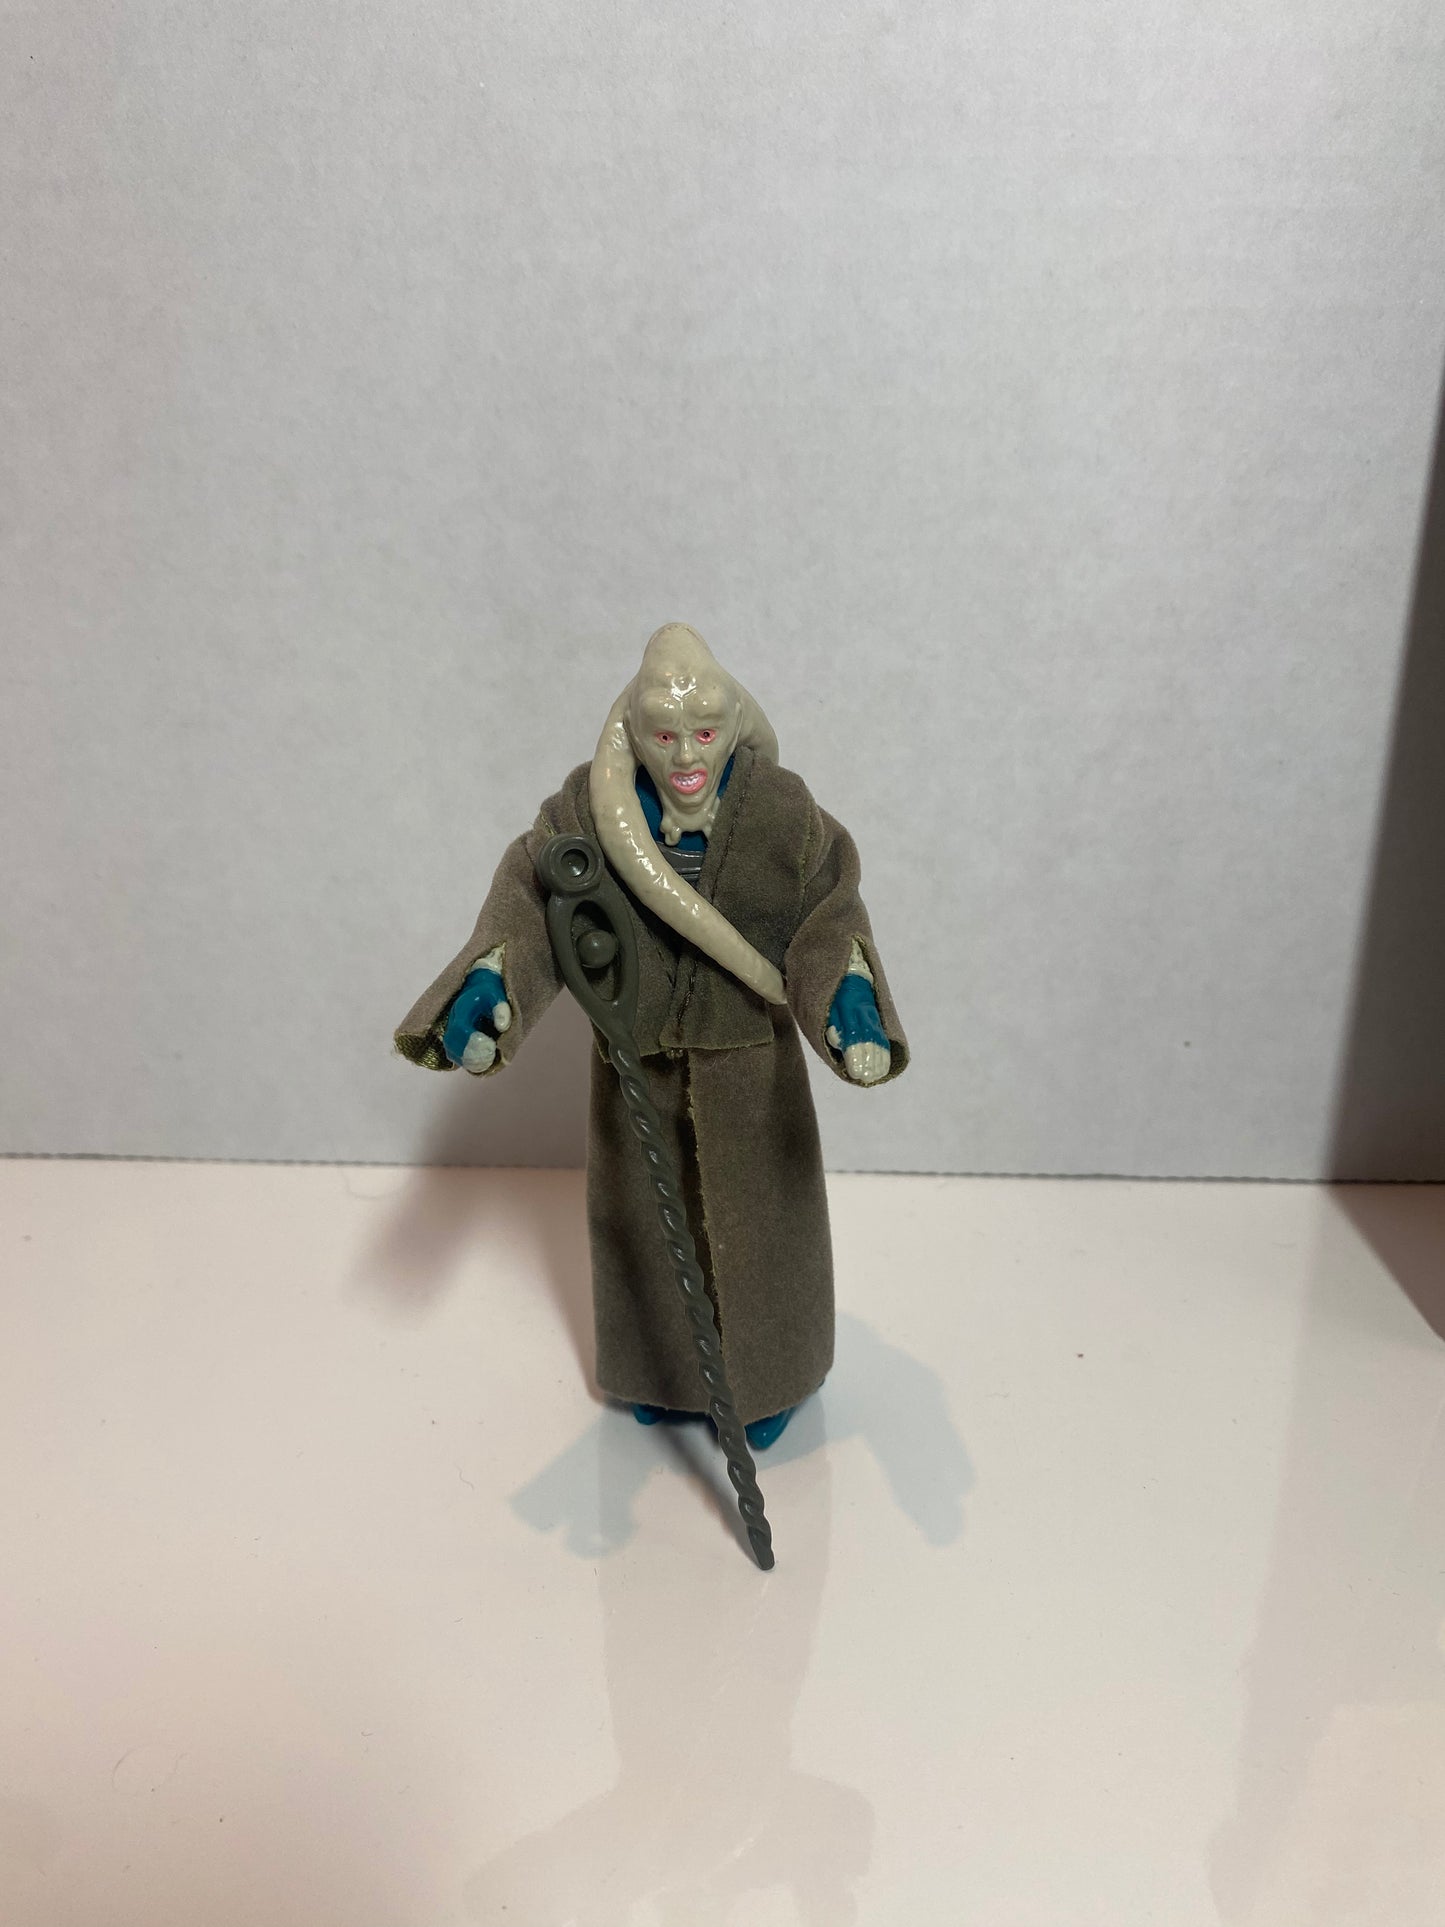 Vintage Star Wars Bib Fortuna Cardback complete with Figure and accessories